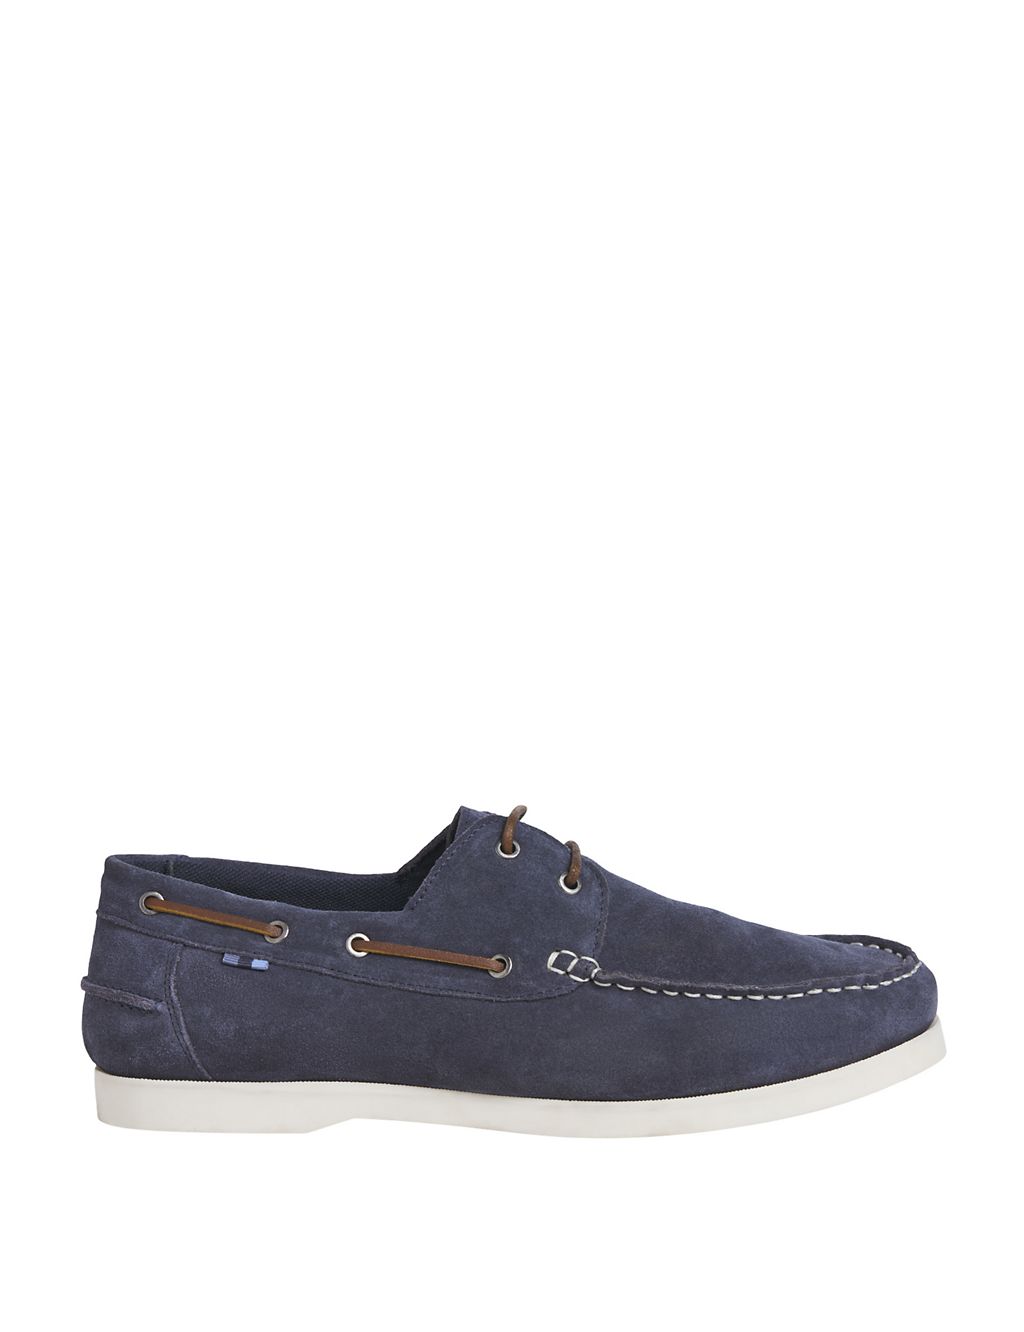 Suede Boat Shoes 1 of 6